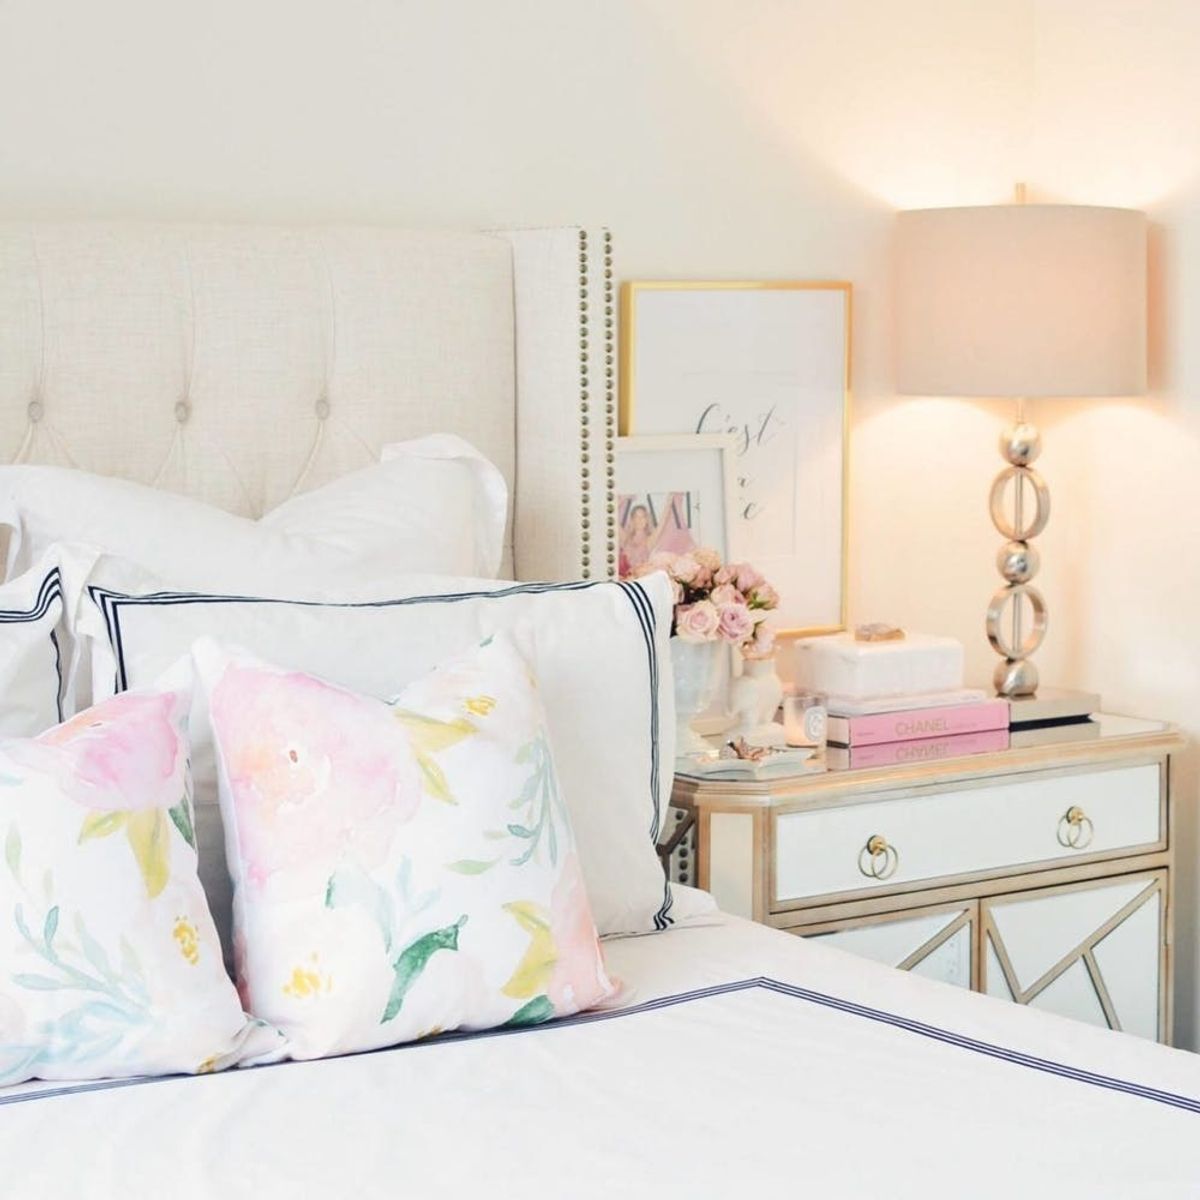 10 Kate Spade New York-Inspired Bedrooms for the Preppy Girl in All of Us